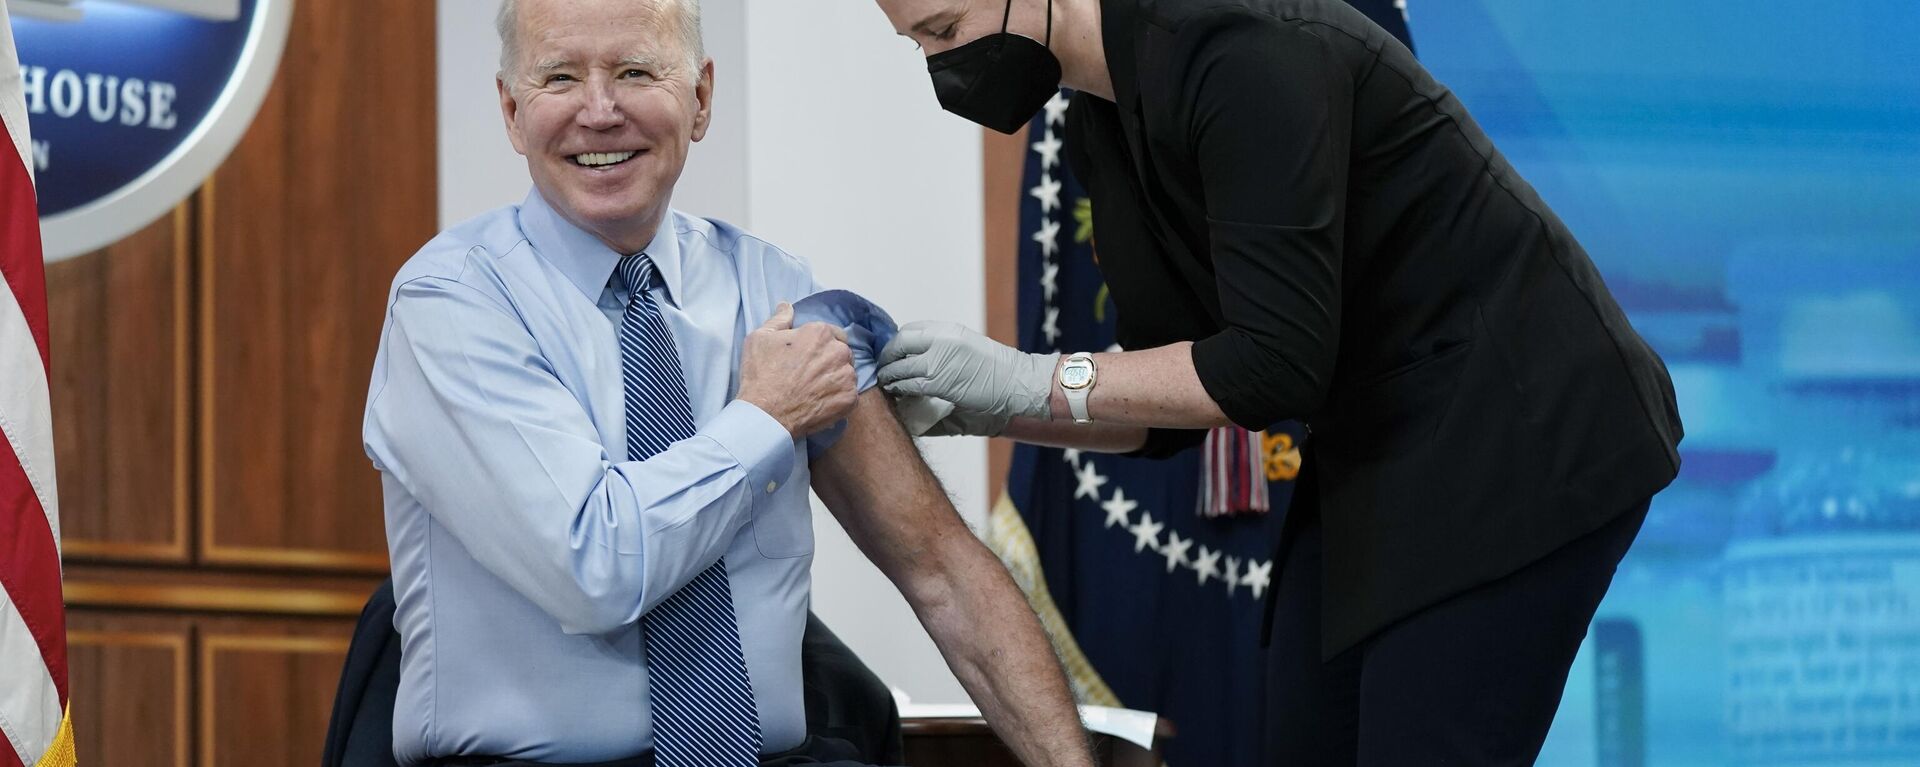 President Joe Biden reacts after receiving his second COVID-19 booster shot in the South Court Auditorium on the White House campus, Wednesday, March 30, 2022, in Washington.  - Sputnik International, 1920, 31.03.2022